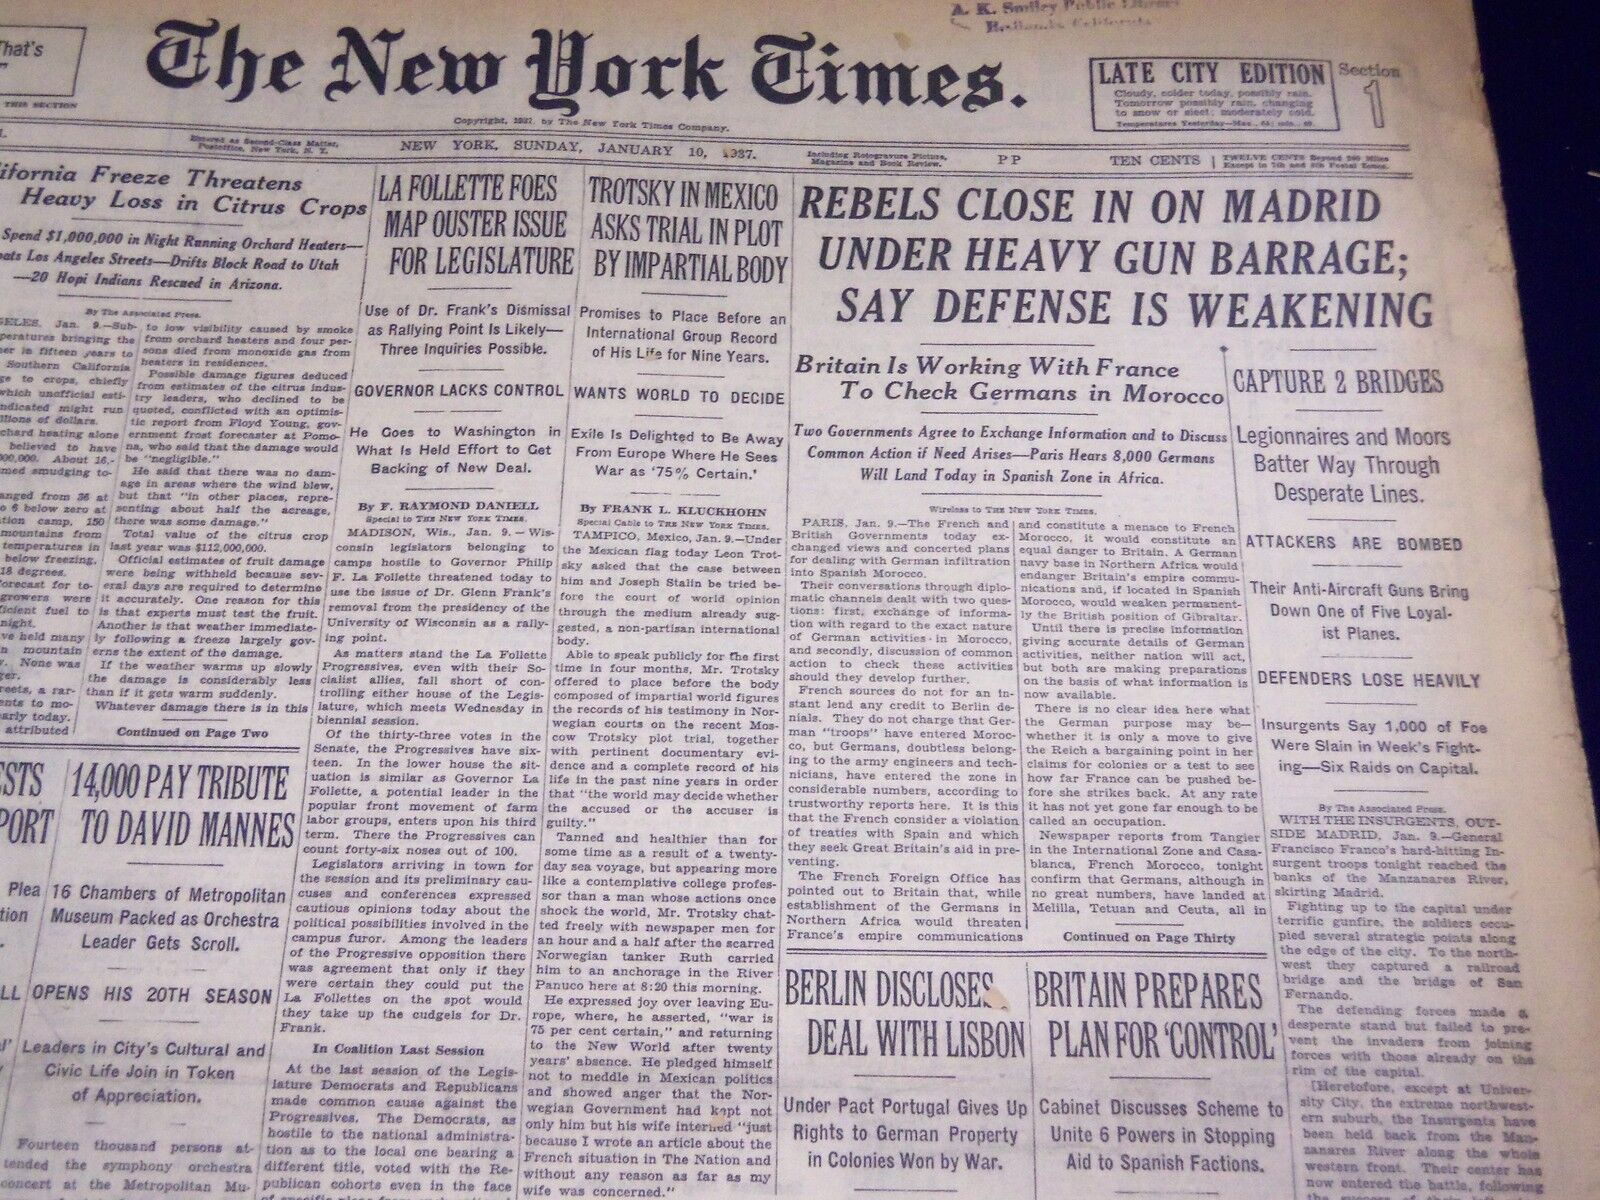 1937 JANUARY 10 NEW YORK TIMES - REBELS CLOSE IN ON MADRID - NT 3094